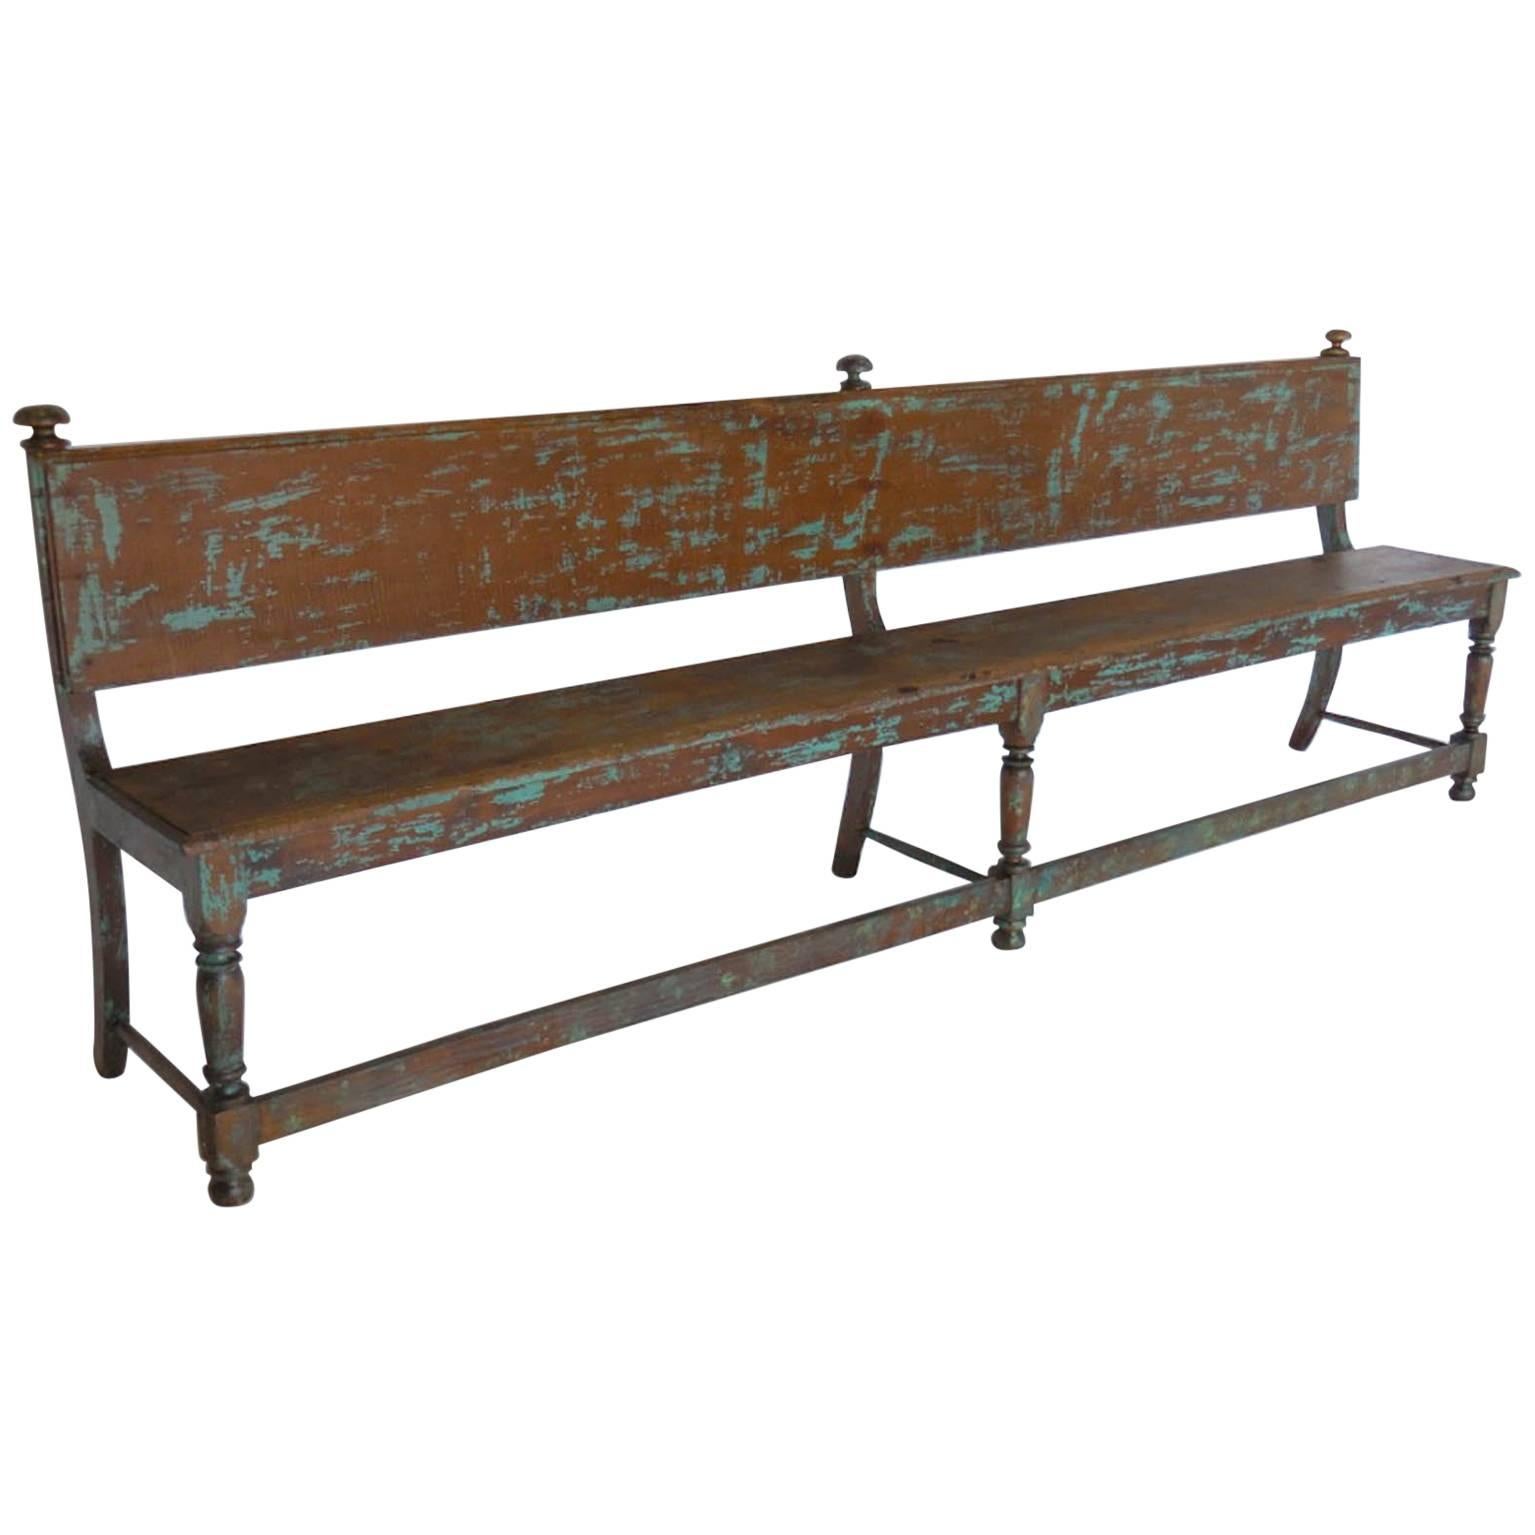 19th Century Bench with Traces of Paint